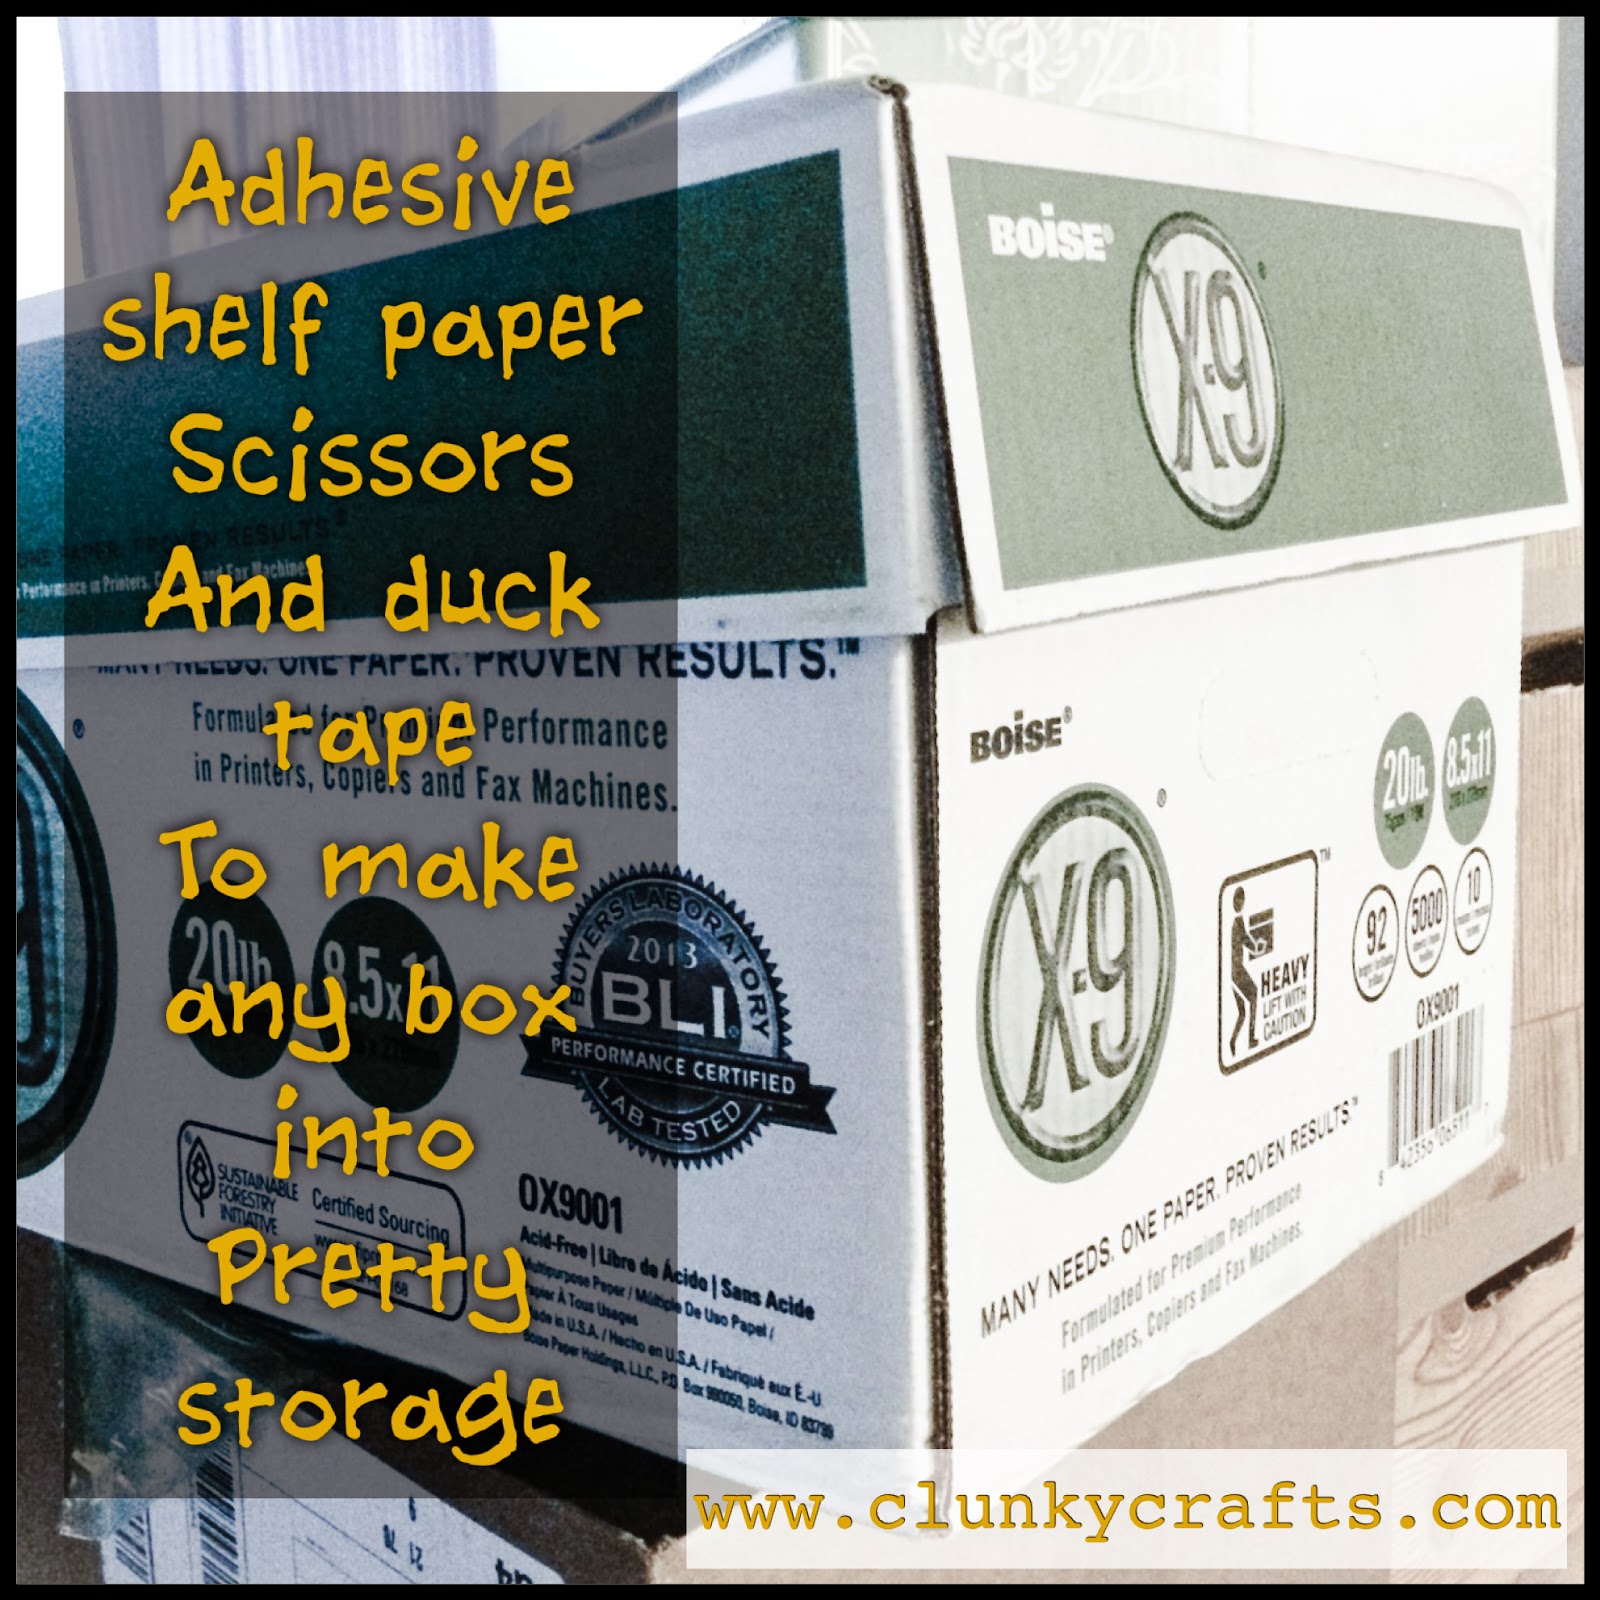 http://www.clunkycrafts.com/2014/02/decorative-boxes.html